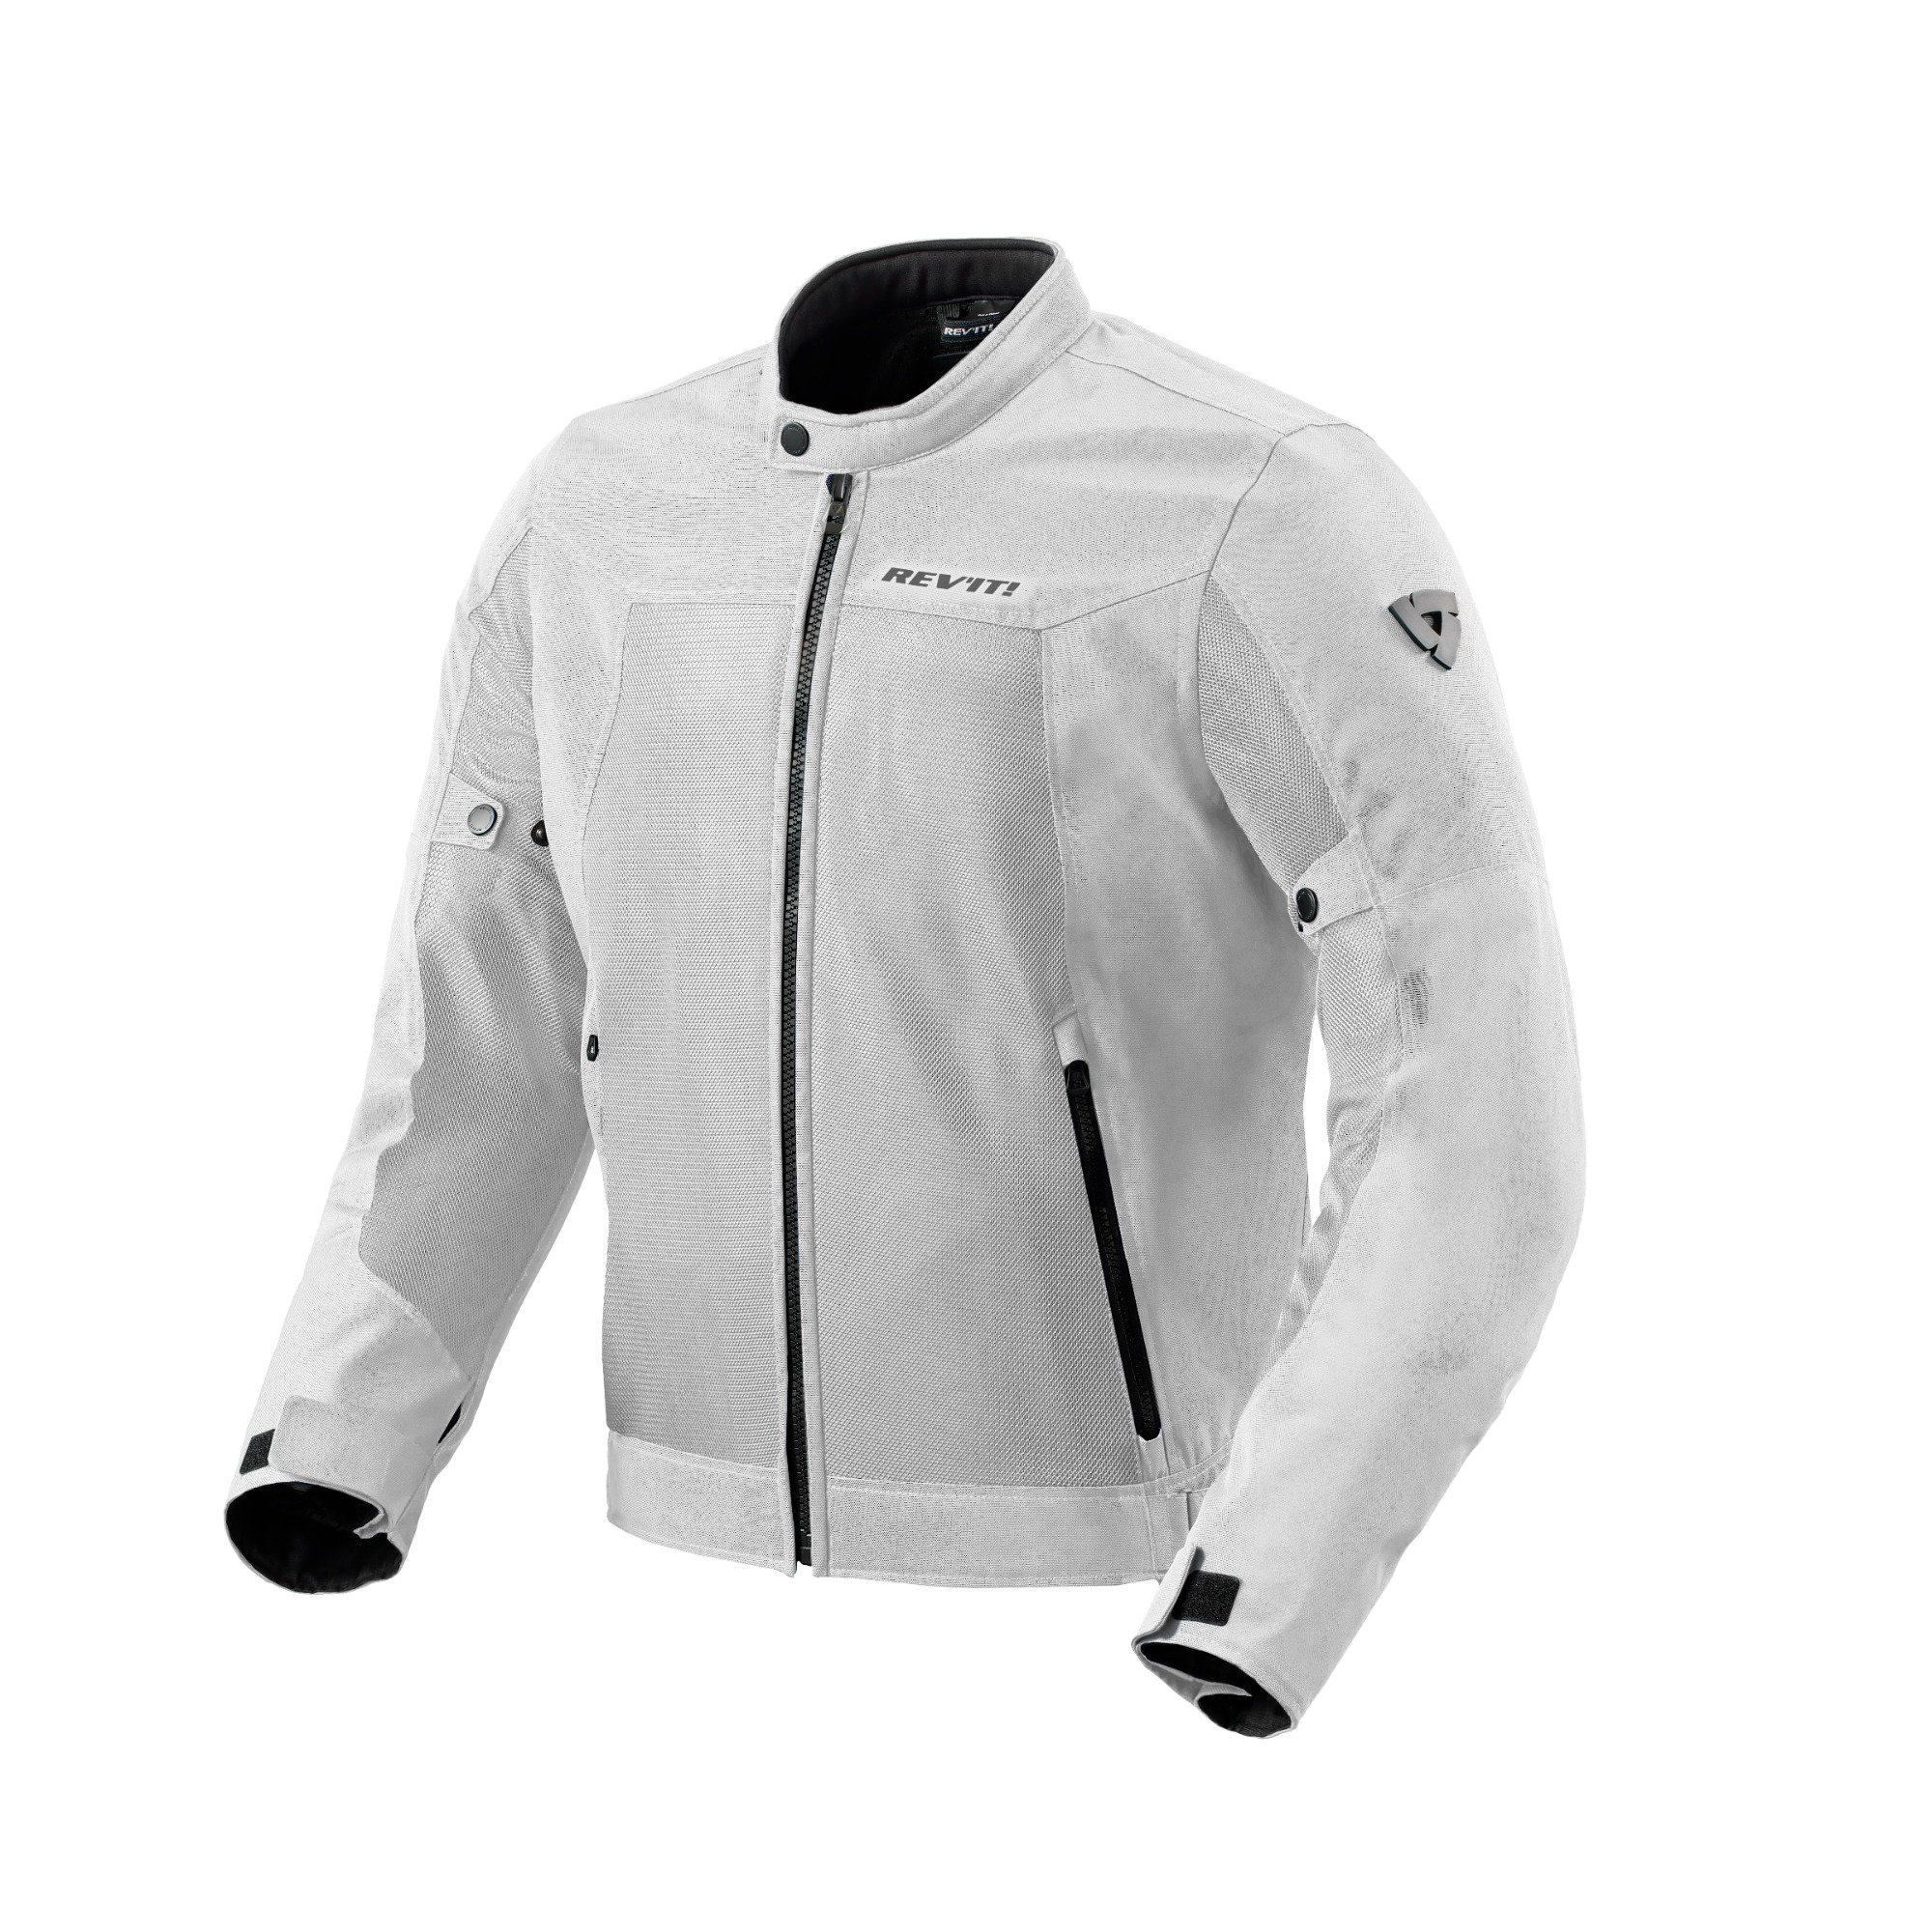 Image of REV'IT! Eclipse 2 Jacket Silver Size M ID 8700001364737